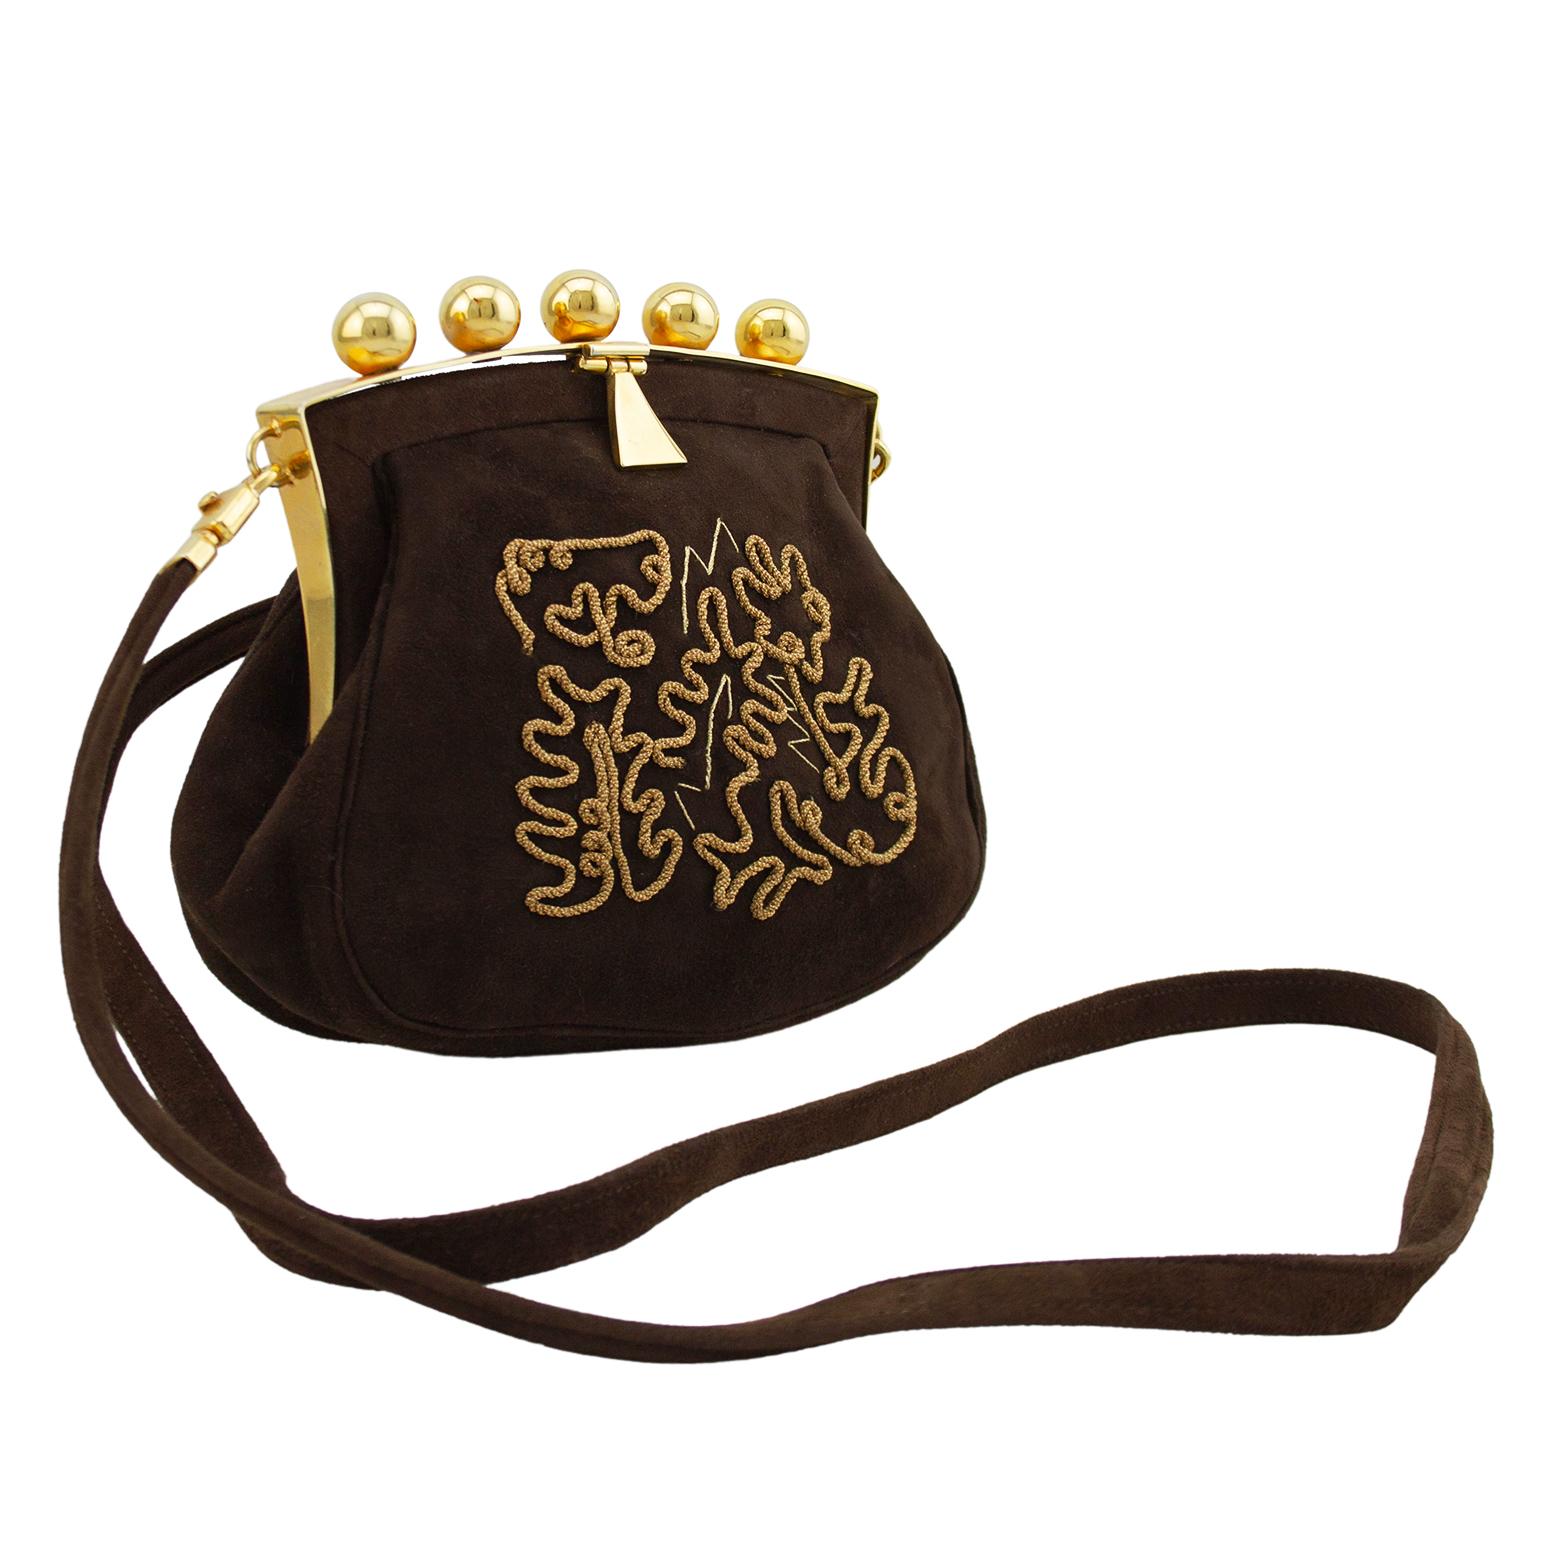 Very unique and interesting Phillippe Model frame style bag from the 1980s. The bag is small, but packed with so much intricate detail. Dark brown suede with abstract twisted gold rope and gold thread embroidery on the front. The top features